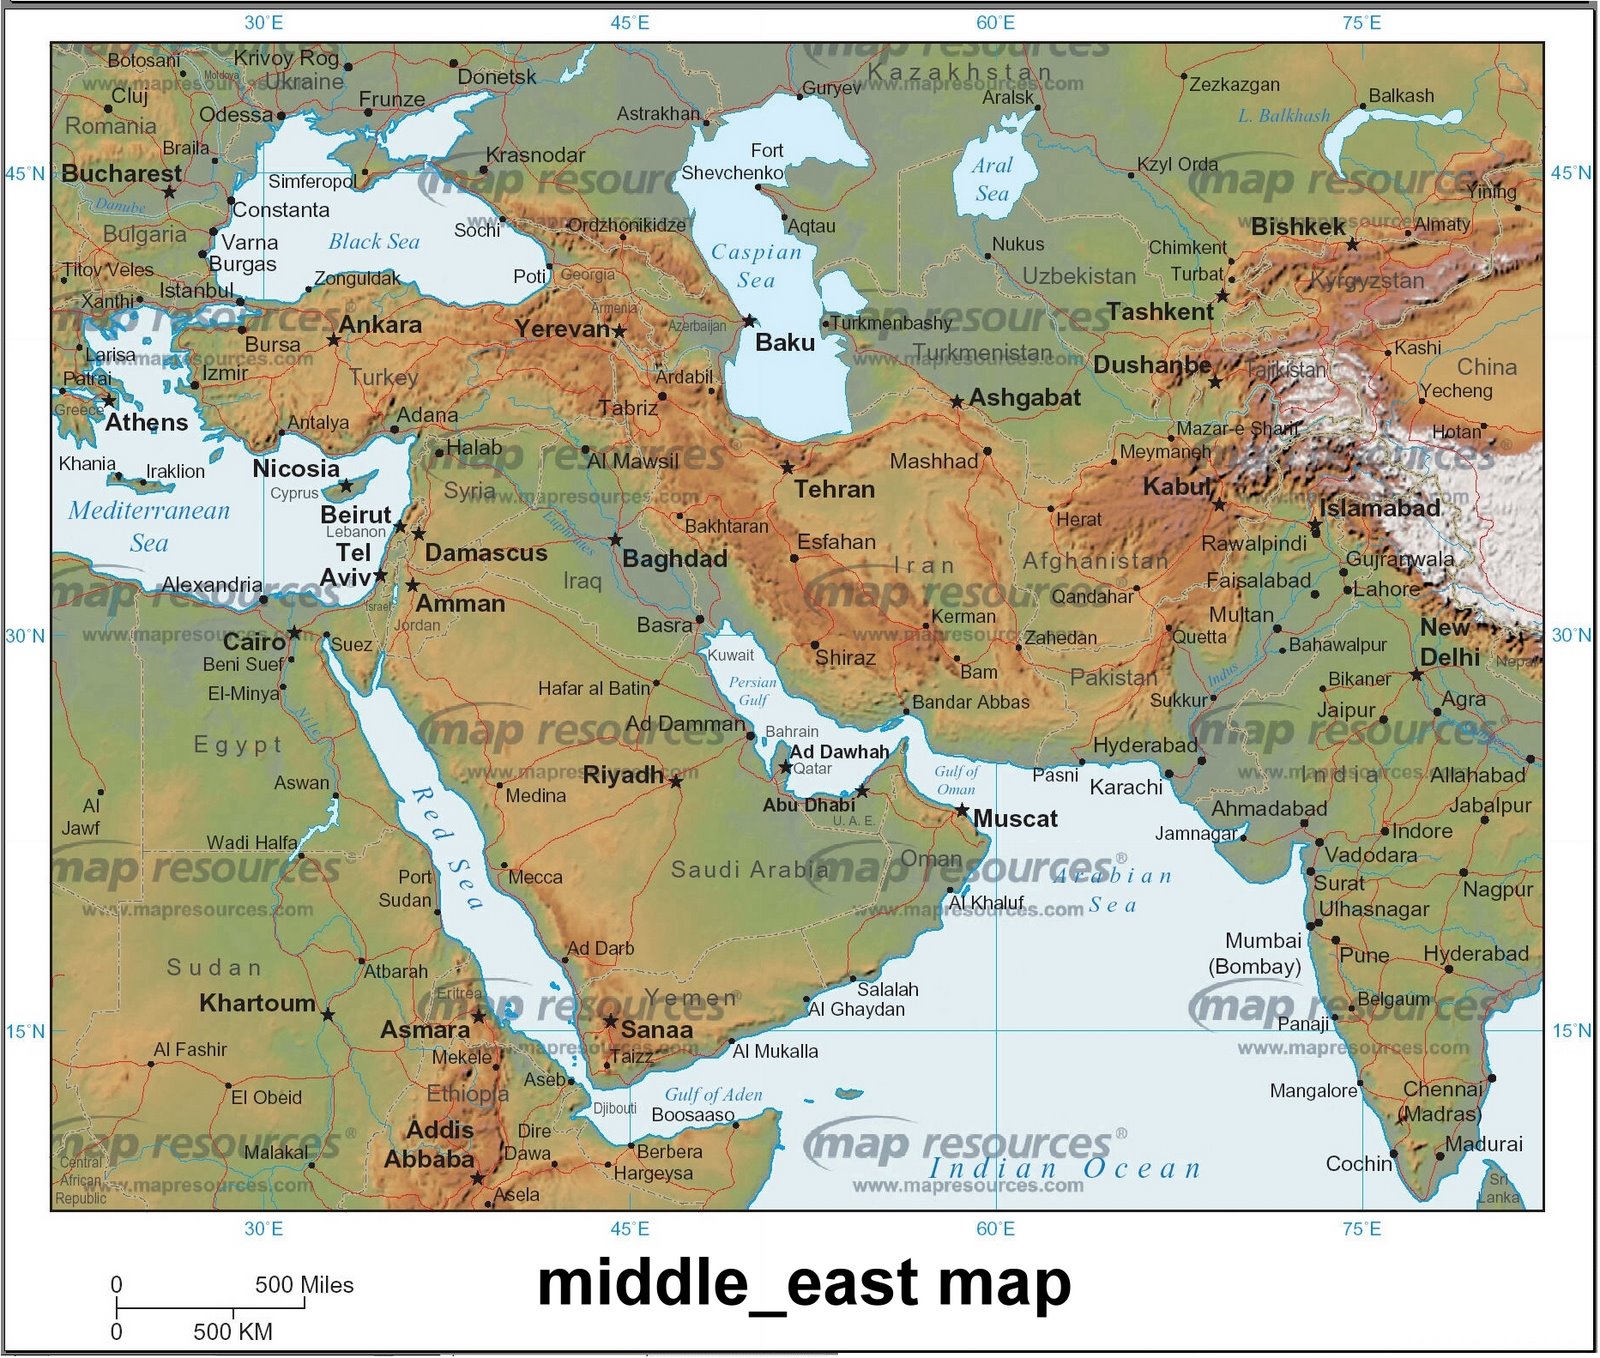 [middle_east%20map.jpg]